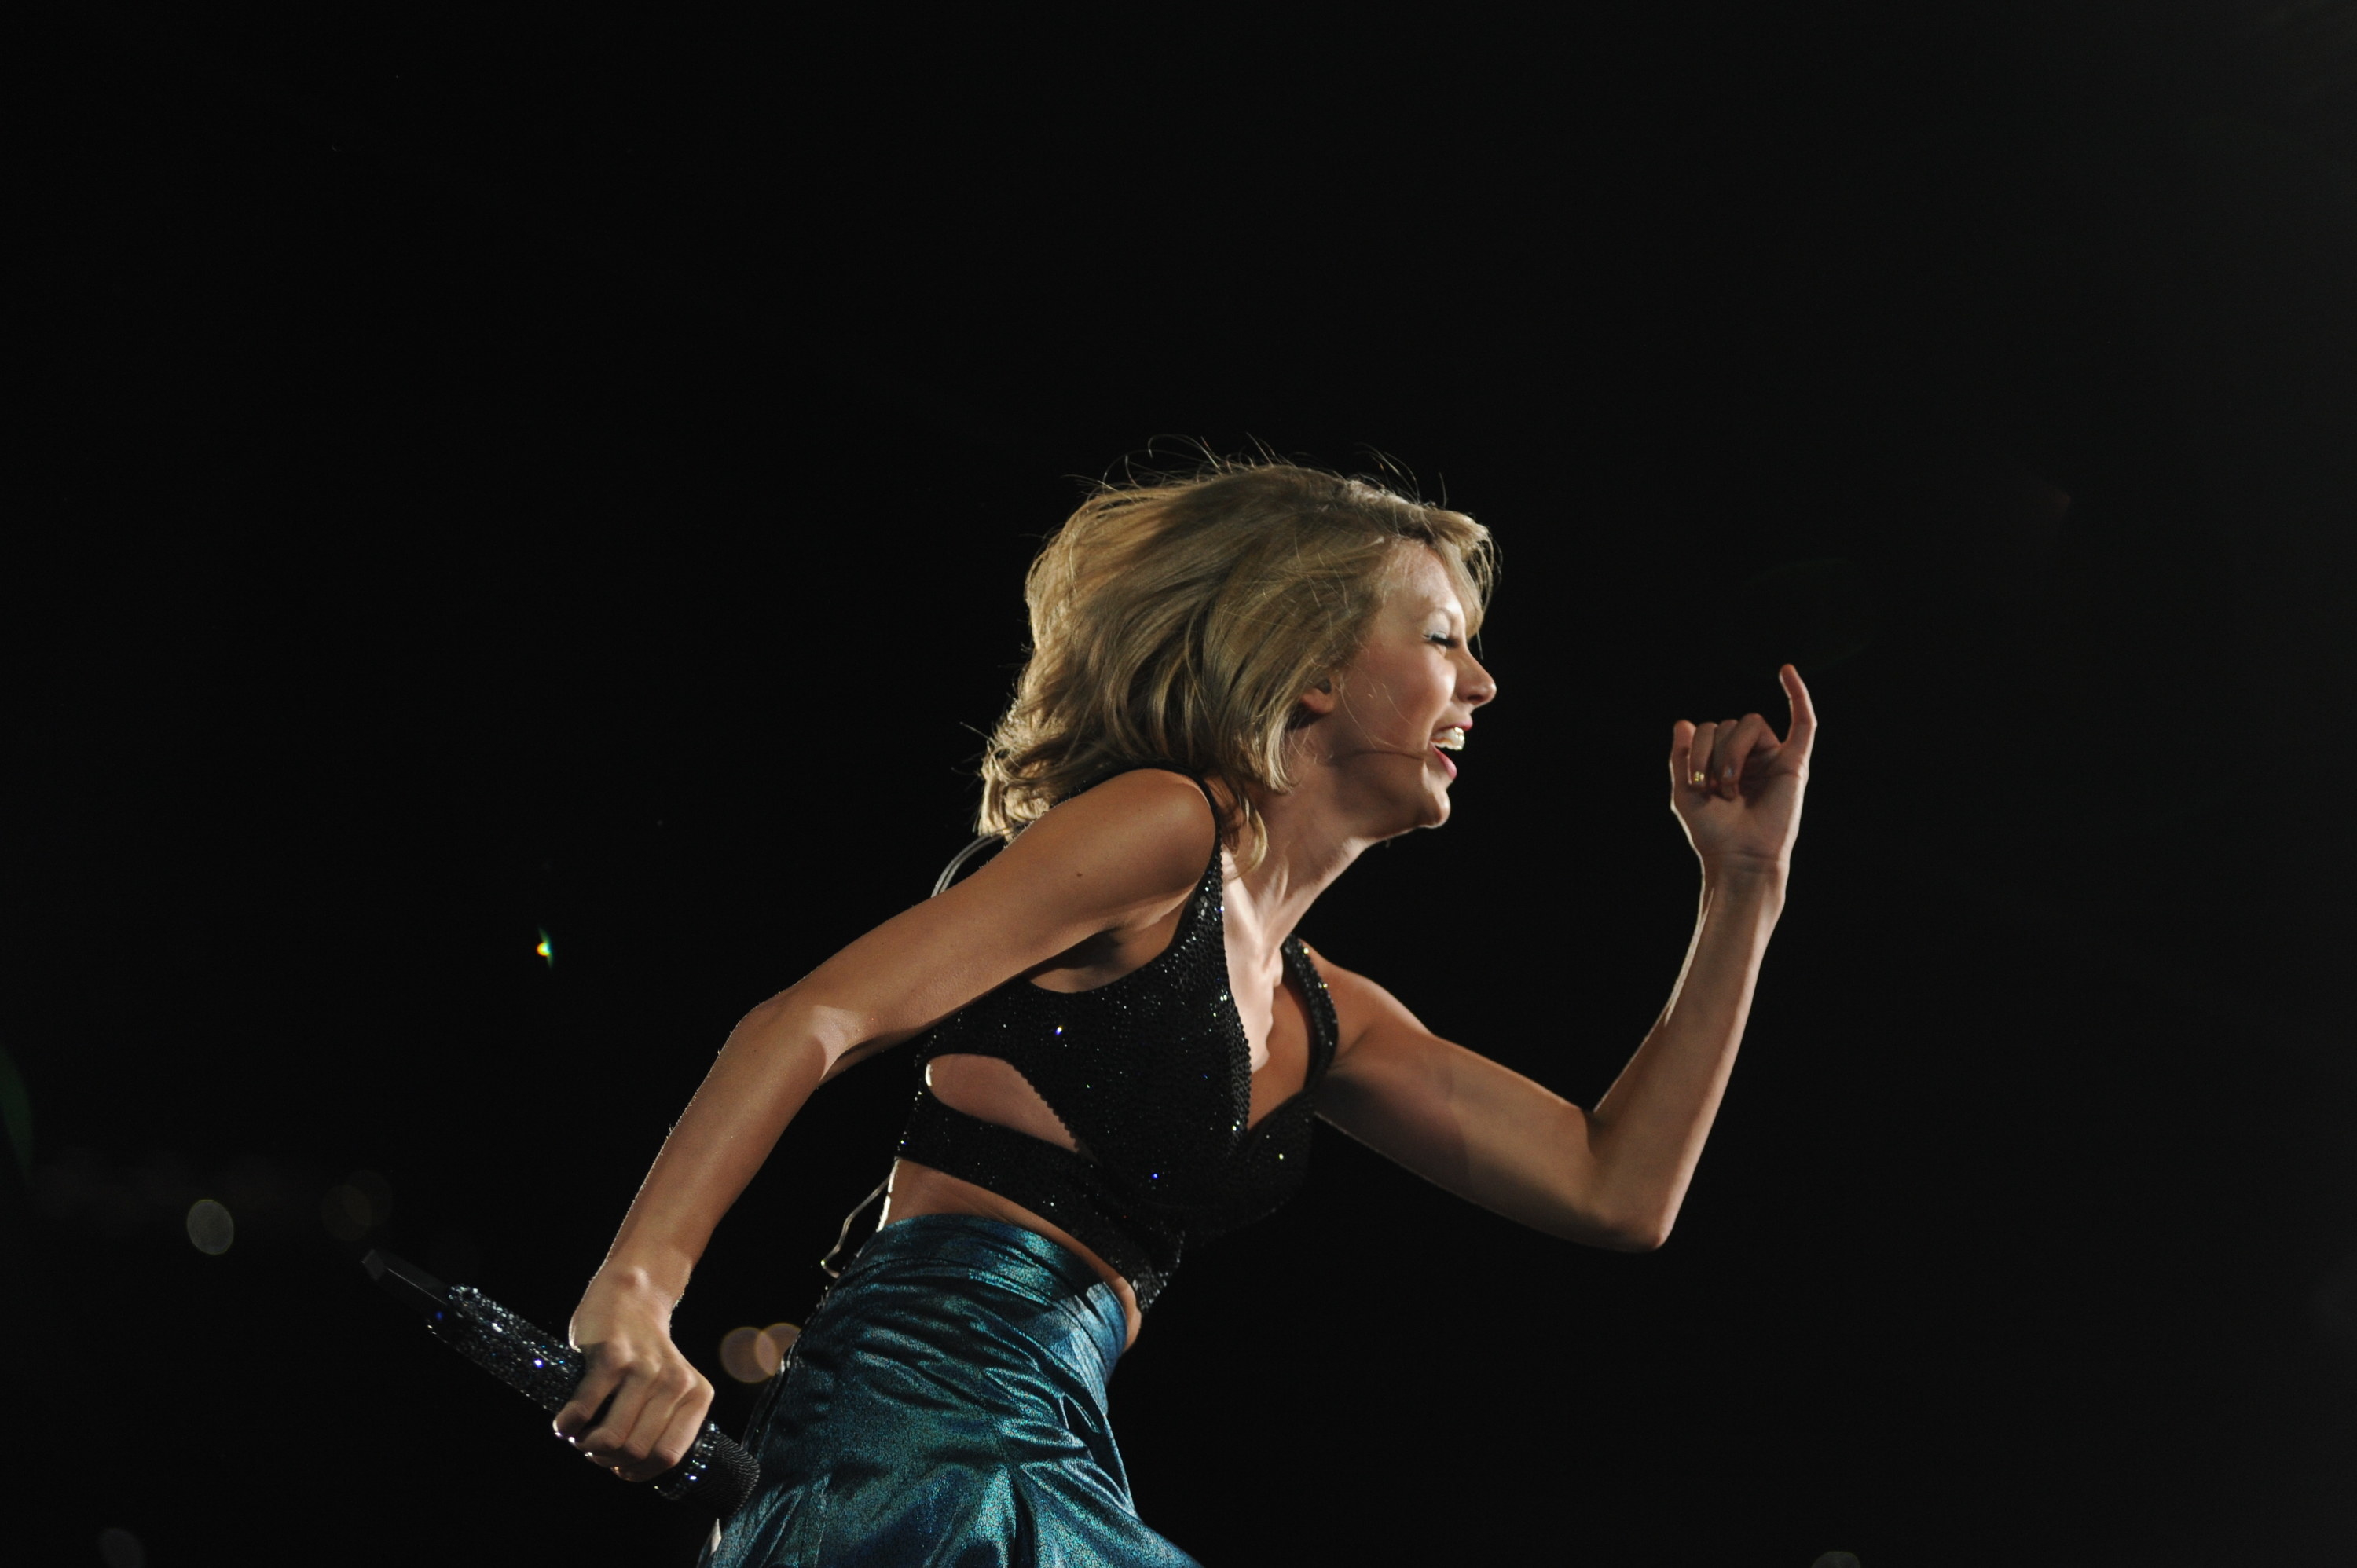 Taylor Swift performs her 1989 Tour at Gillette Stadium